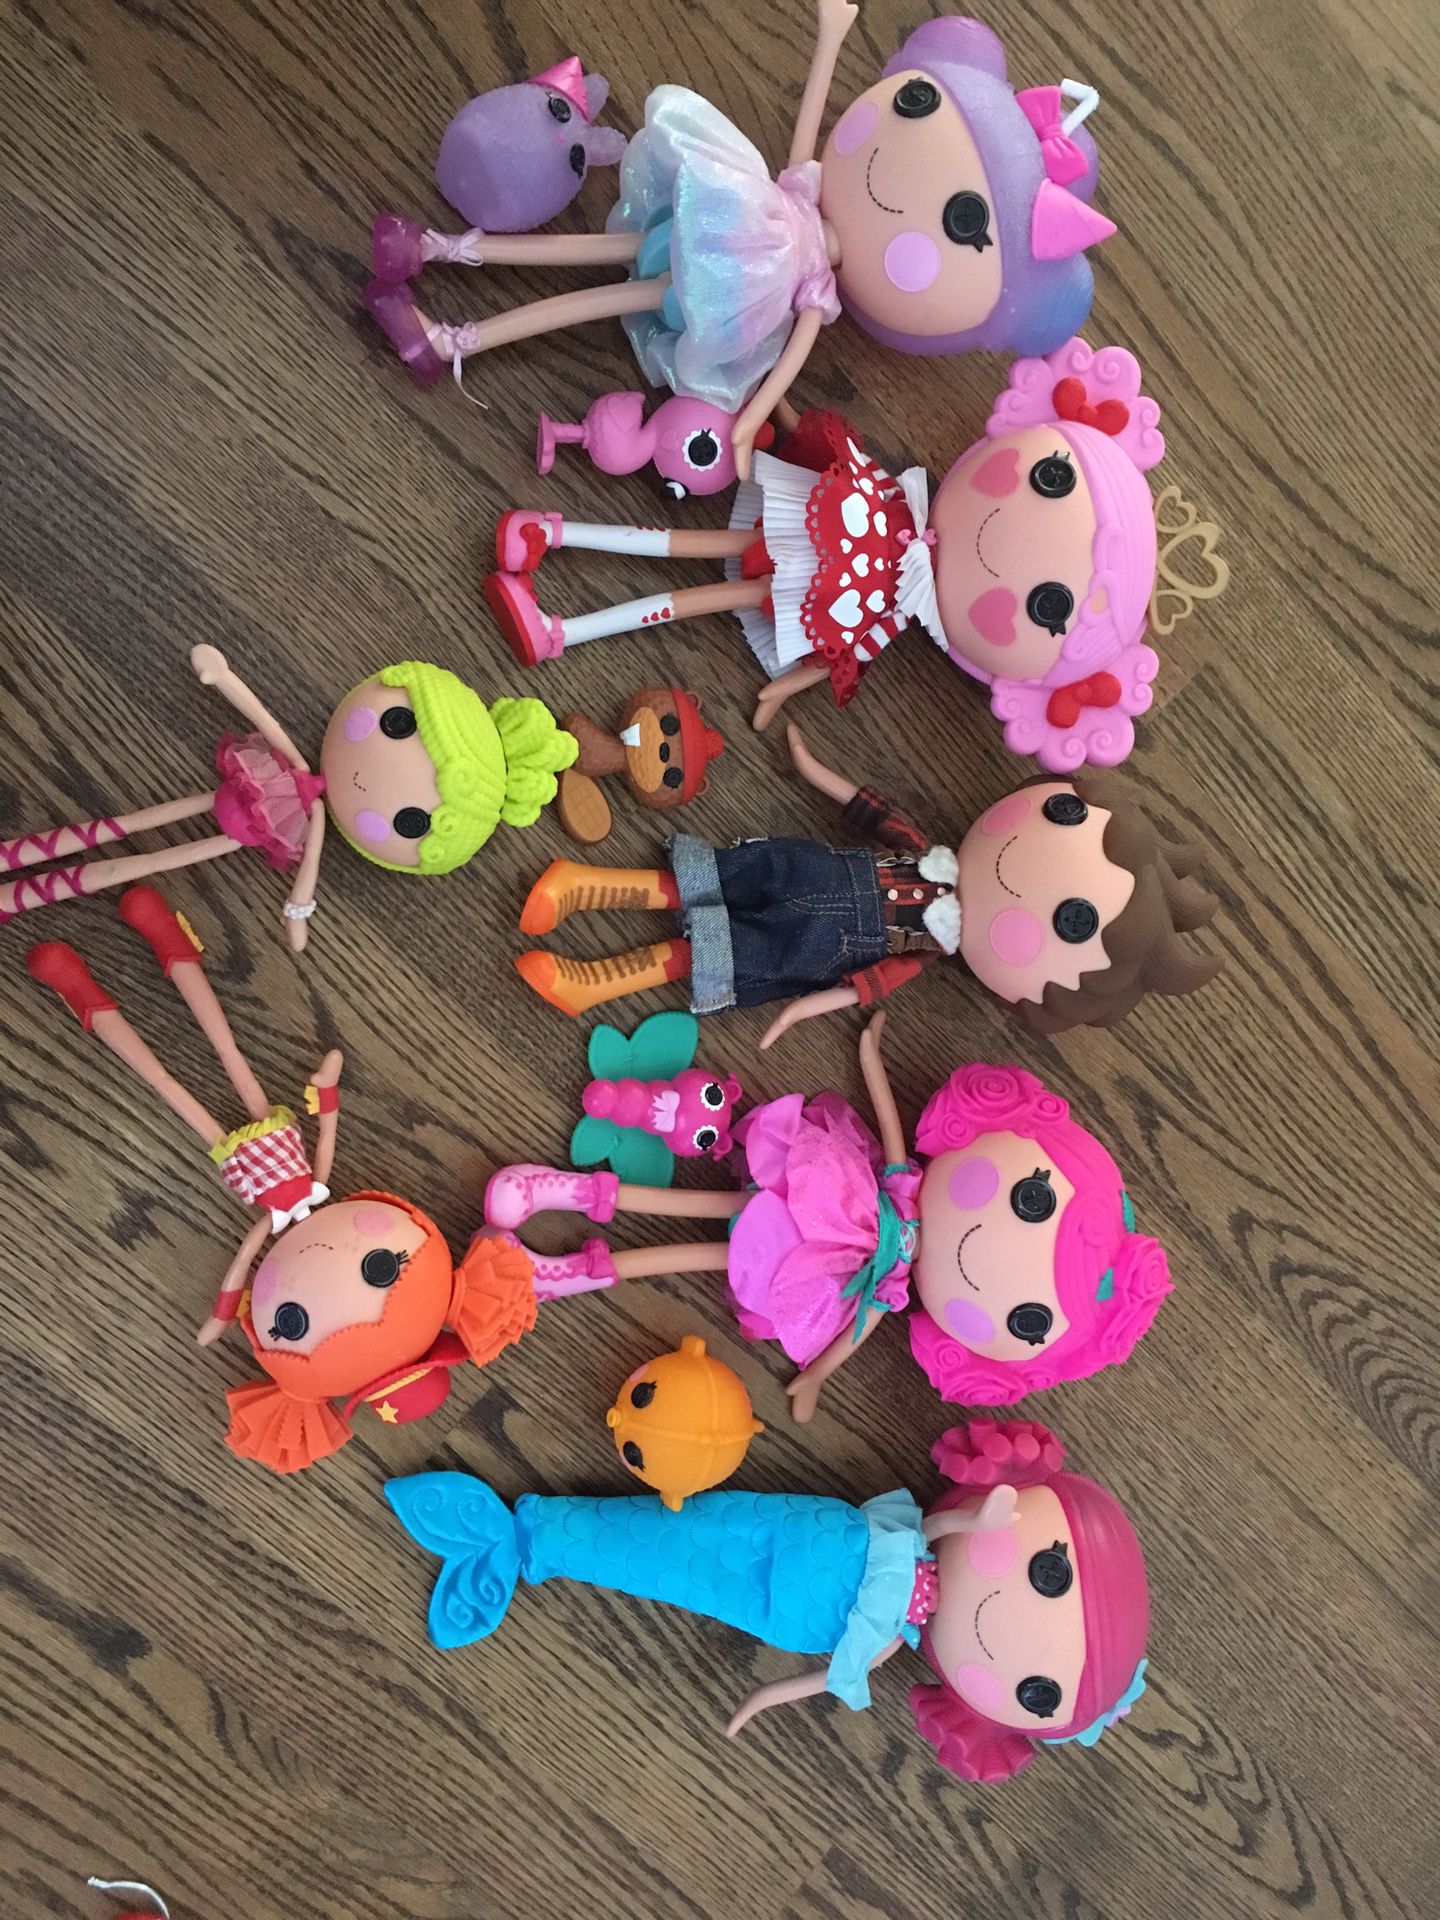 Lalaloopsy dolls with their pal